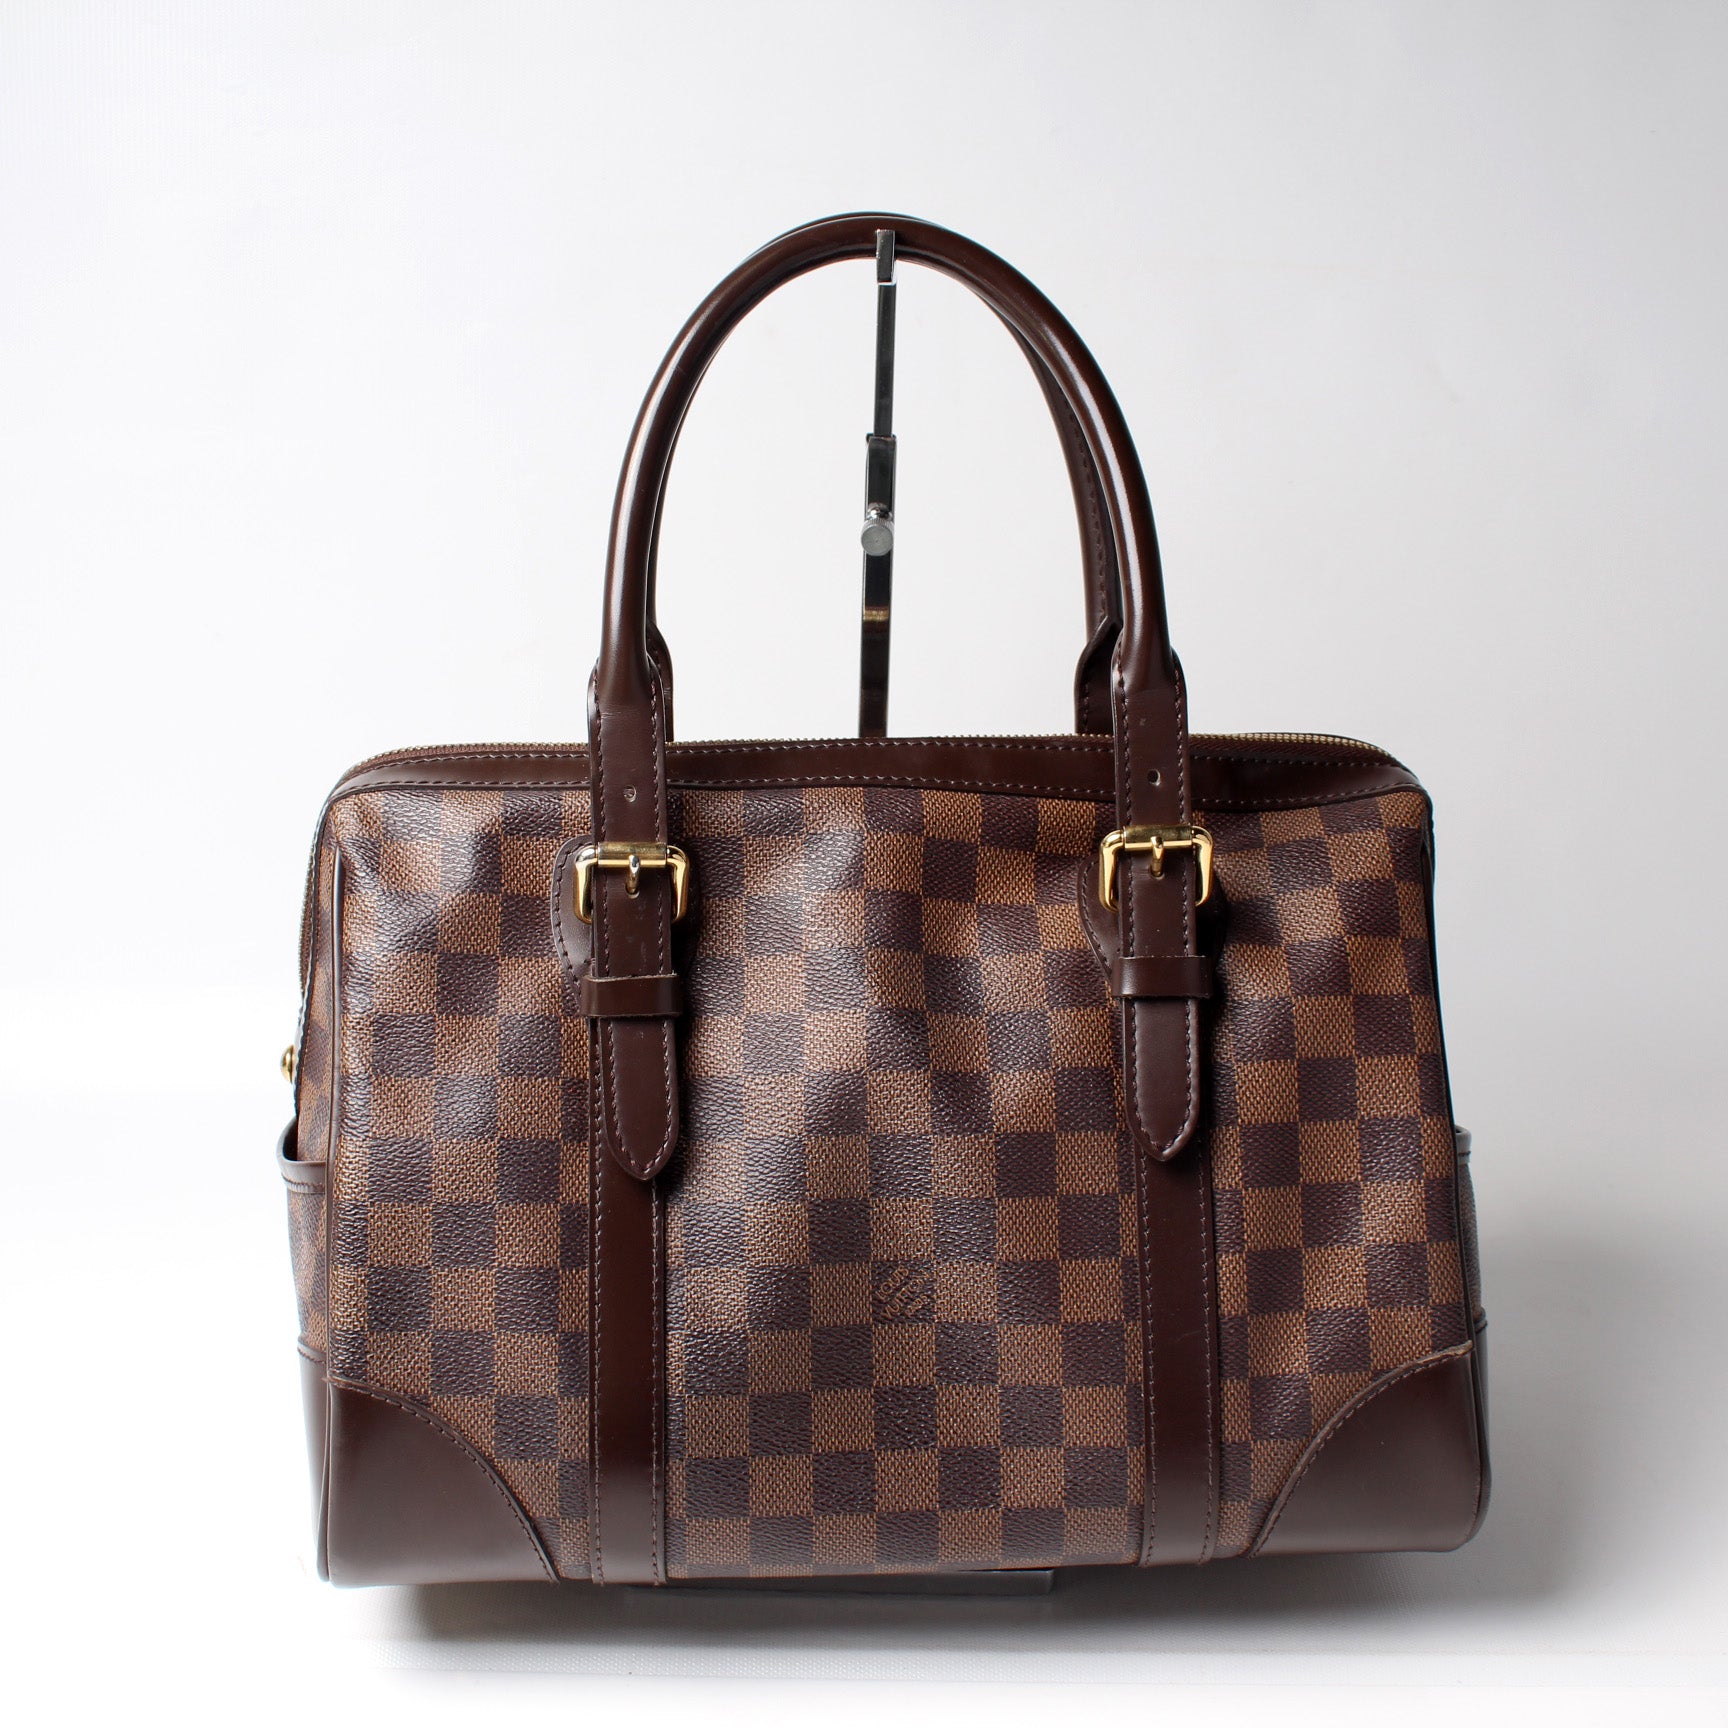 authentic louis vuitton berkeley damier handbag used only 2 time